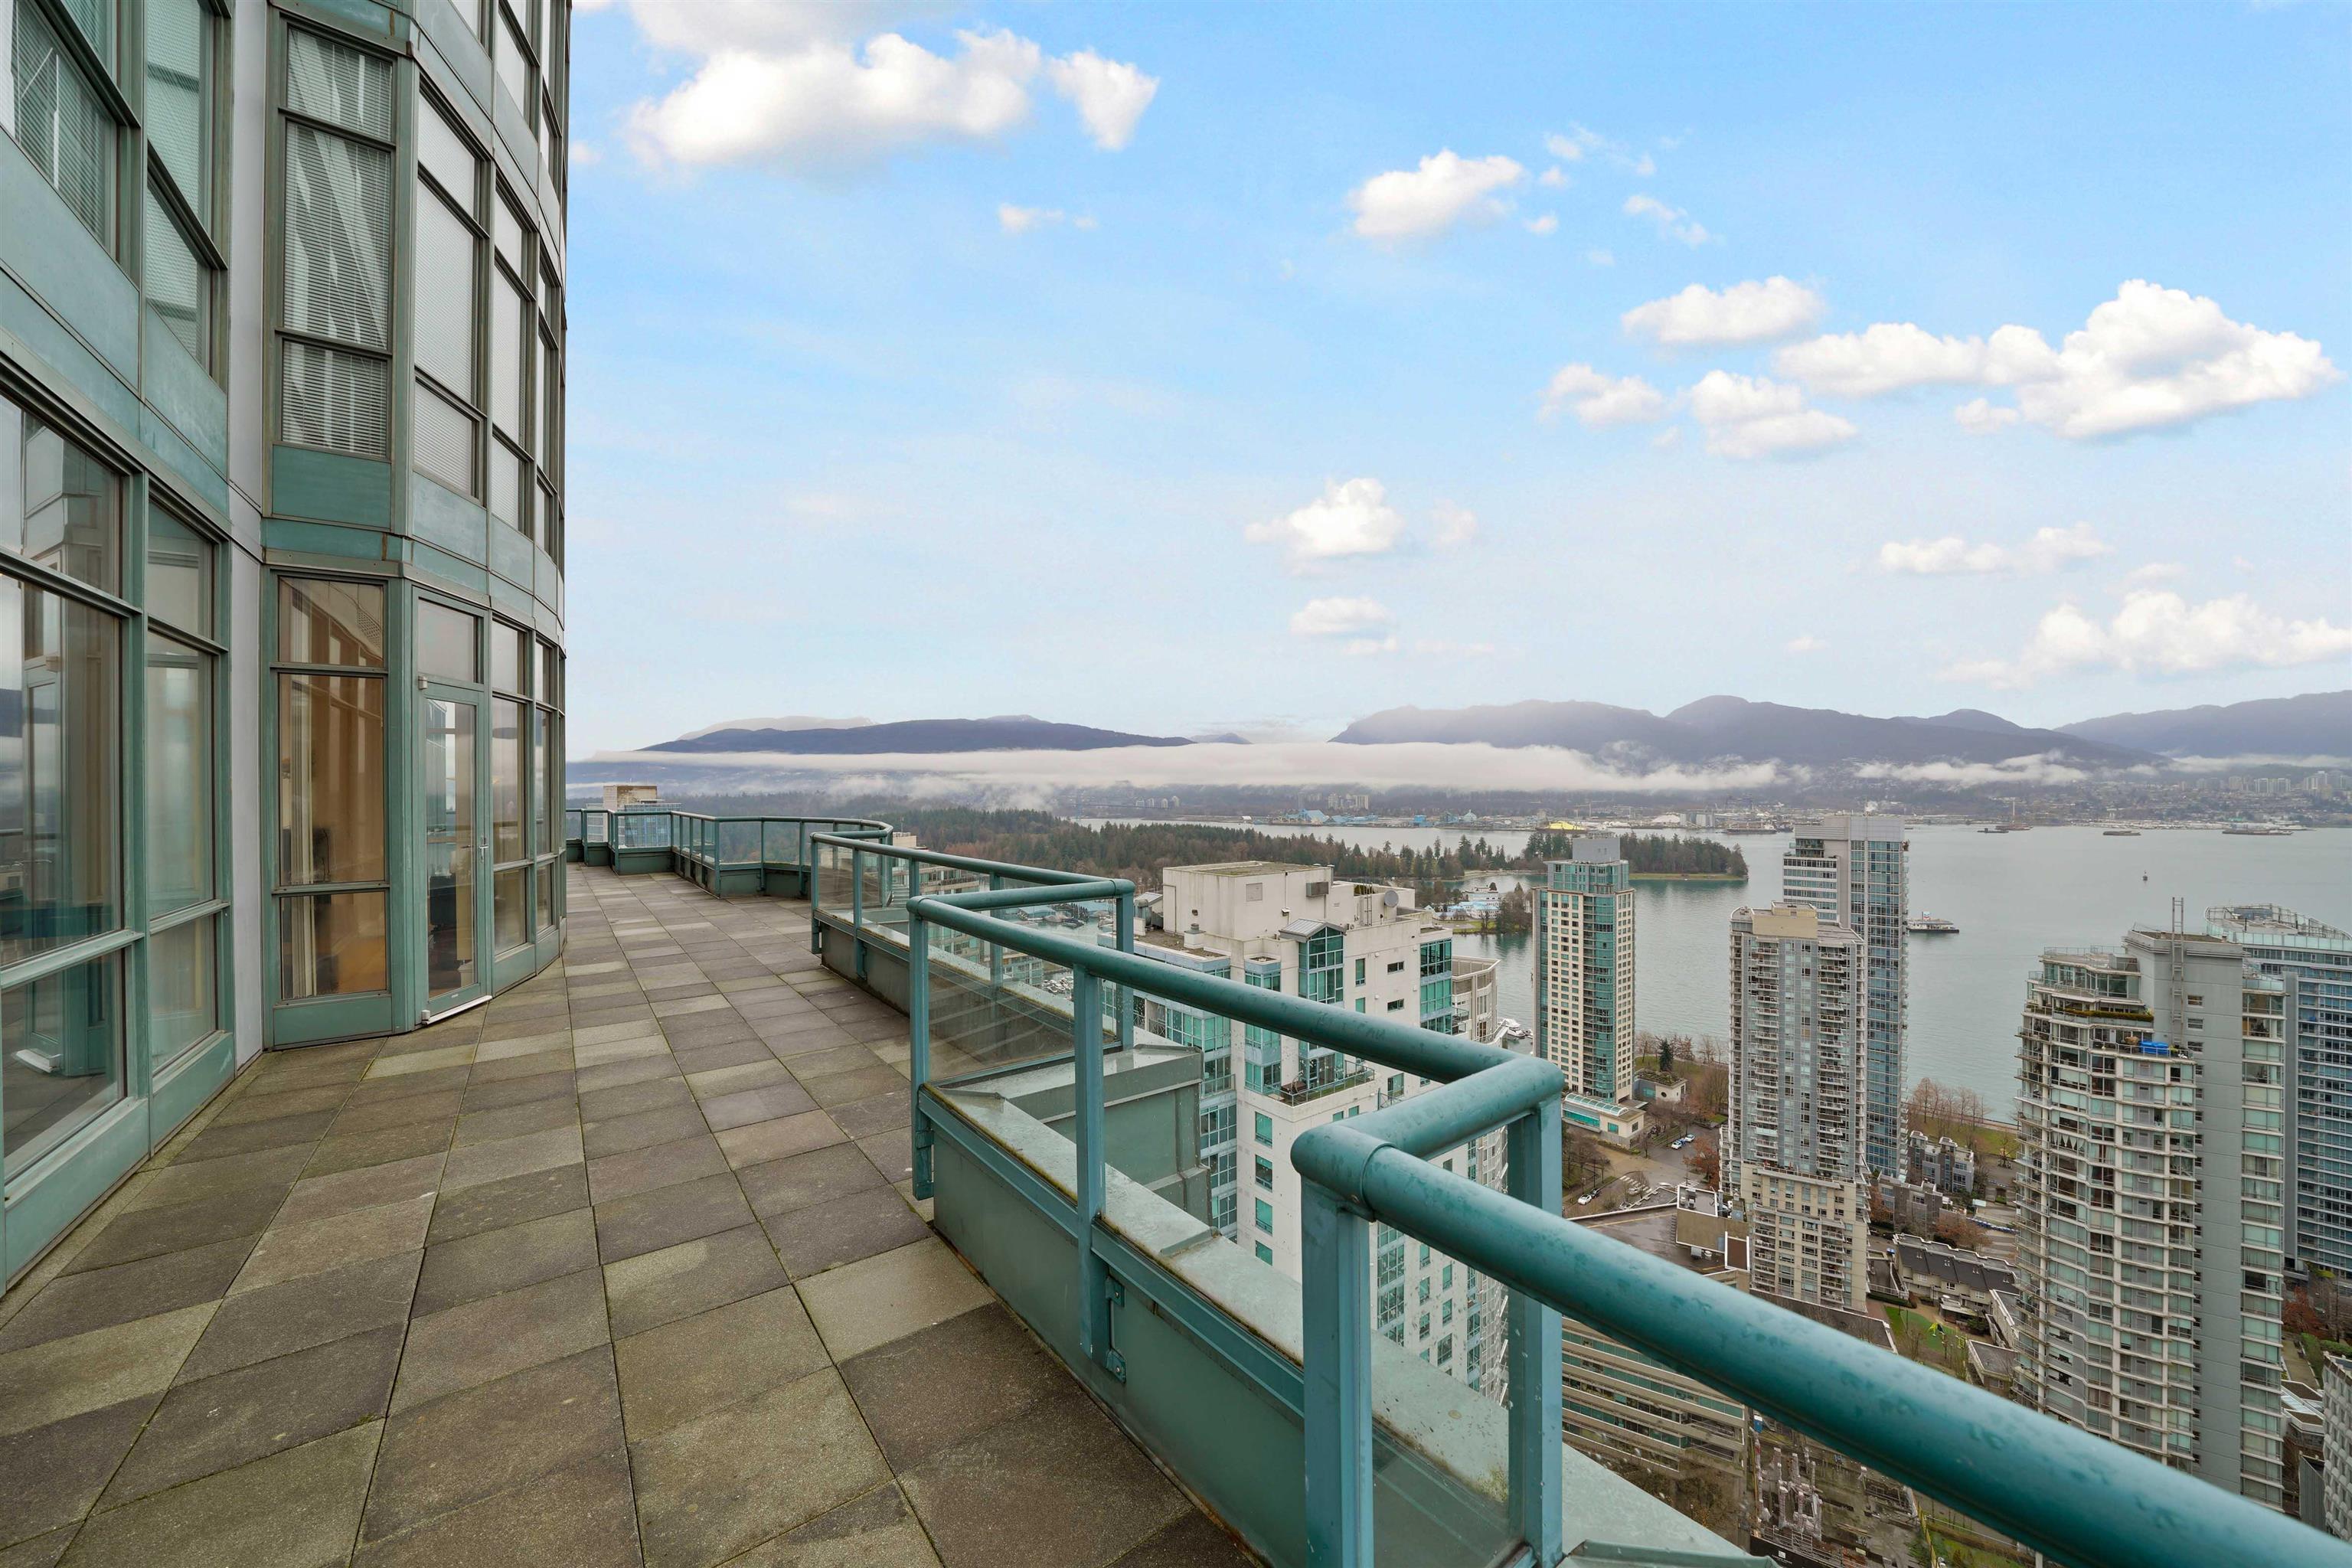 905 sqft. of balcony space with unrivaled panoramic views of Coal Harbour, West Vancouver Mountains, English Bay and Downtown Vancouver!